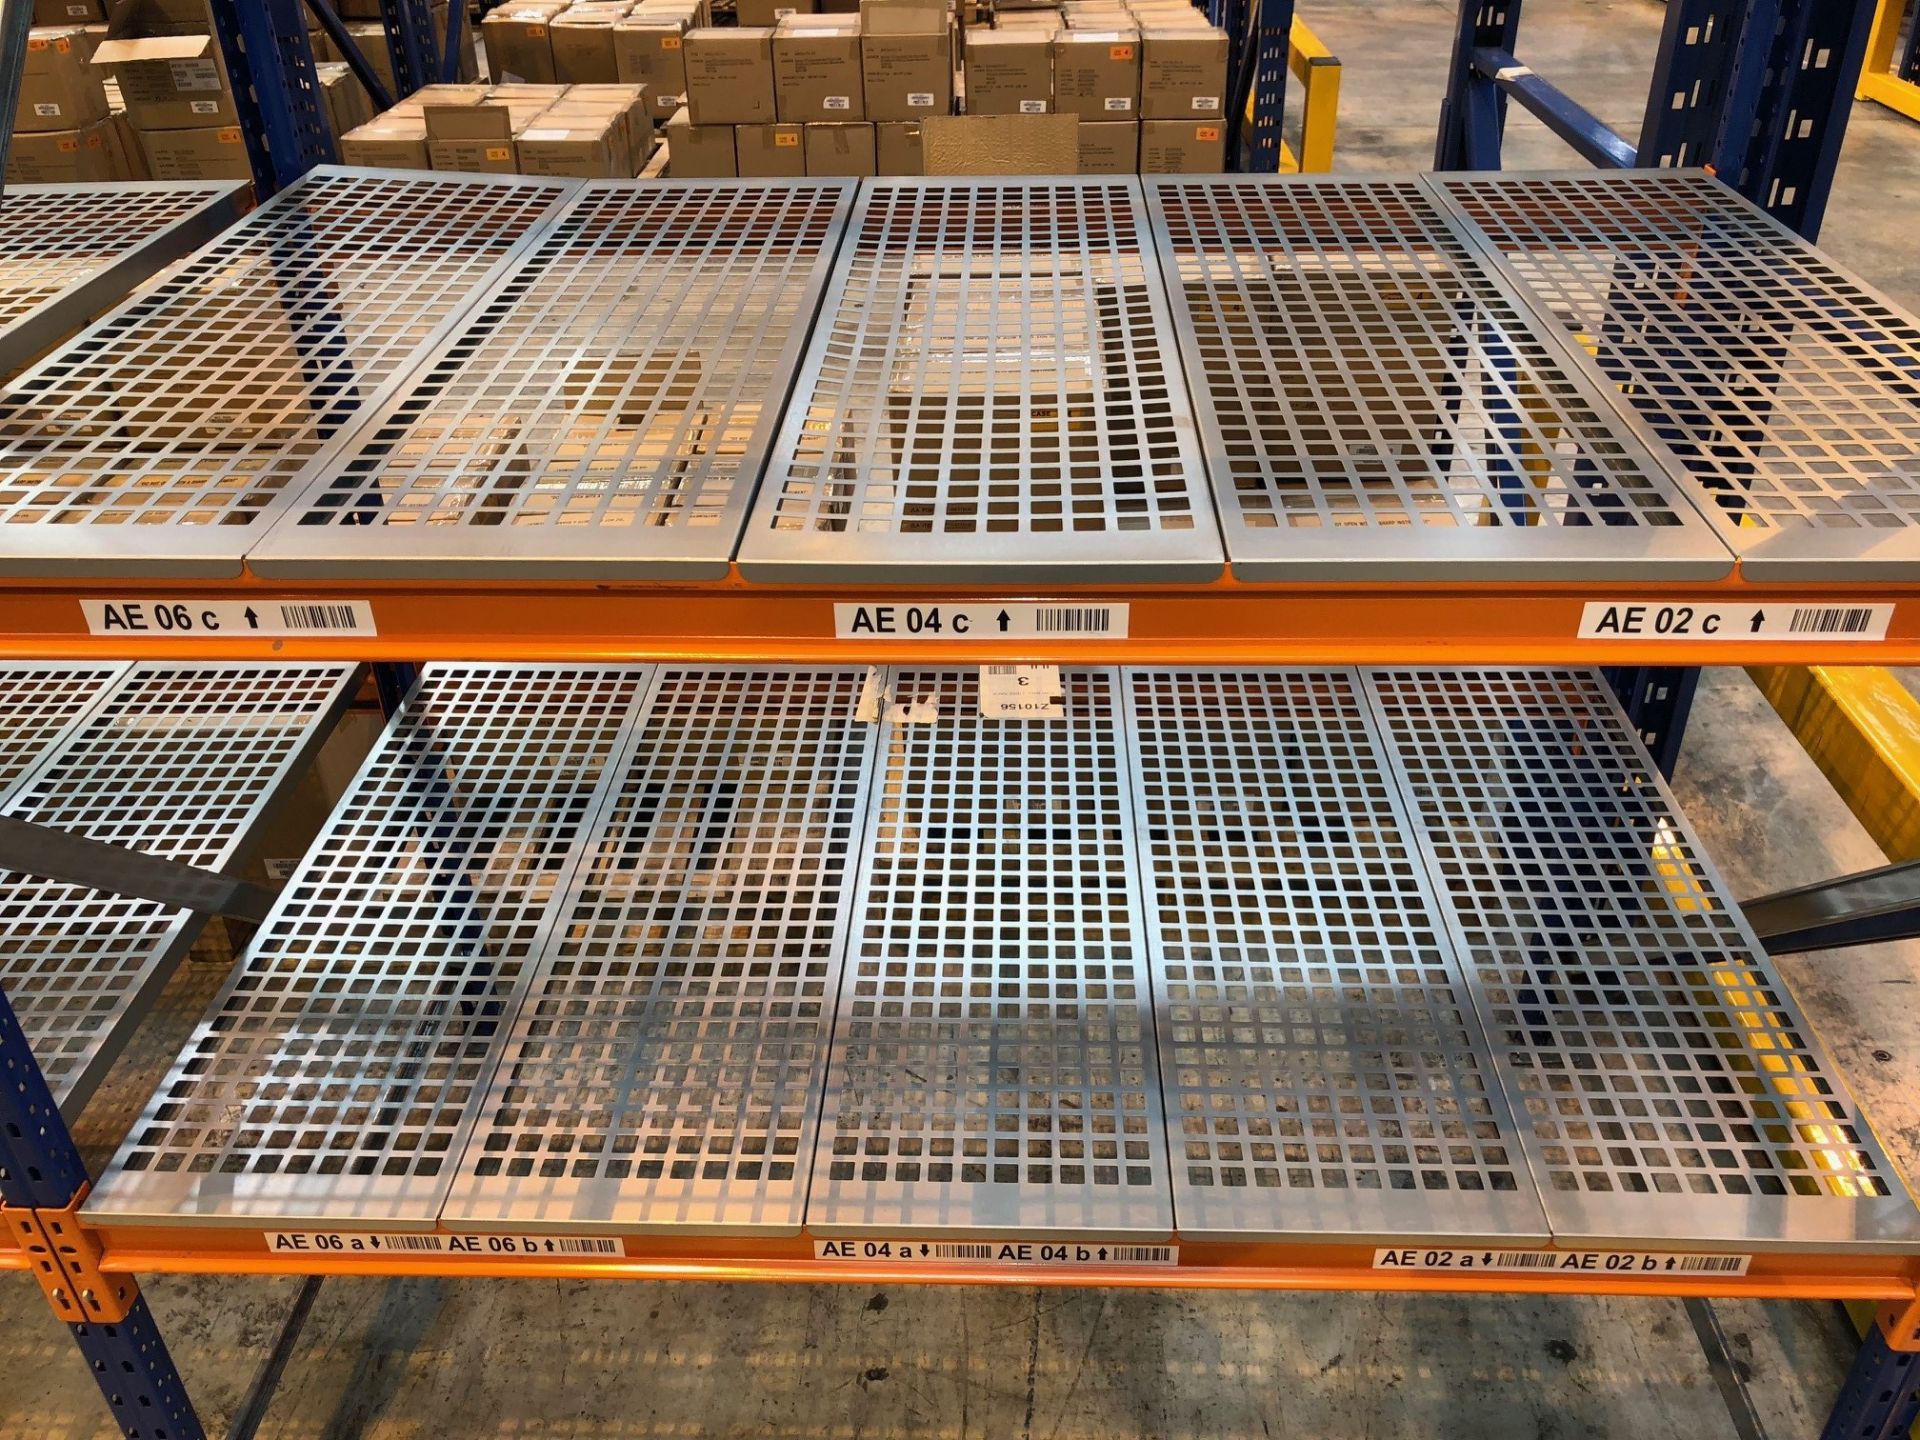 2 x Bays of Small Warehouse Racking/Shelving - Excellent Condition (L1500xH2000xD900mm - 3 x Upright - Image 3 of 4